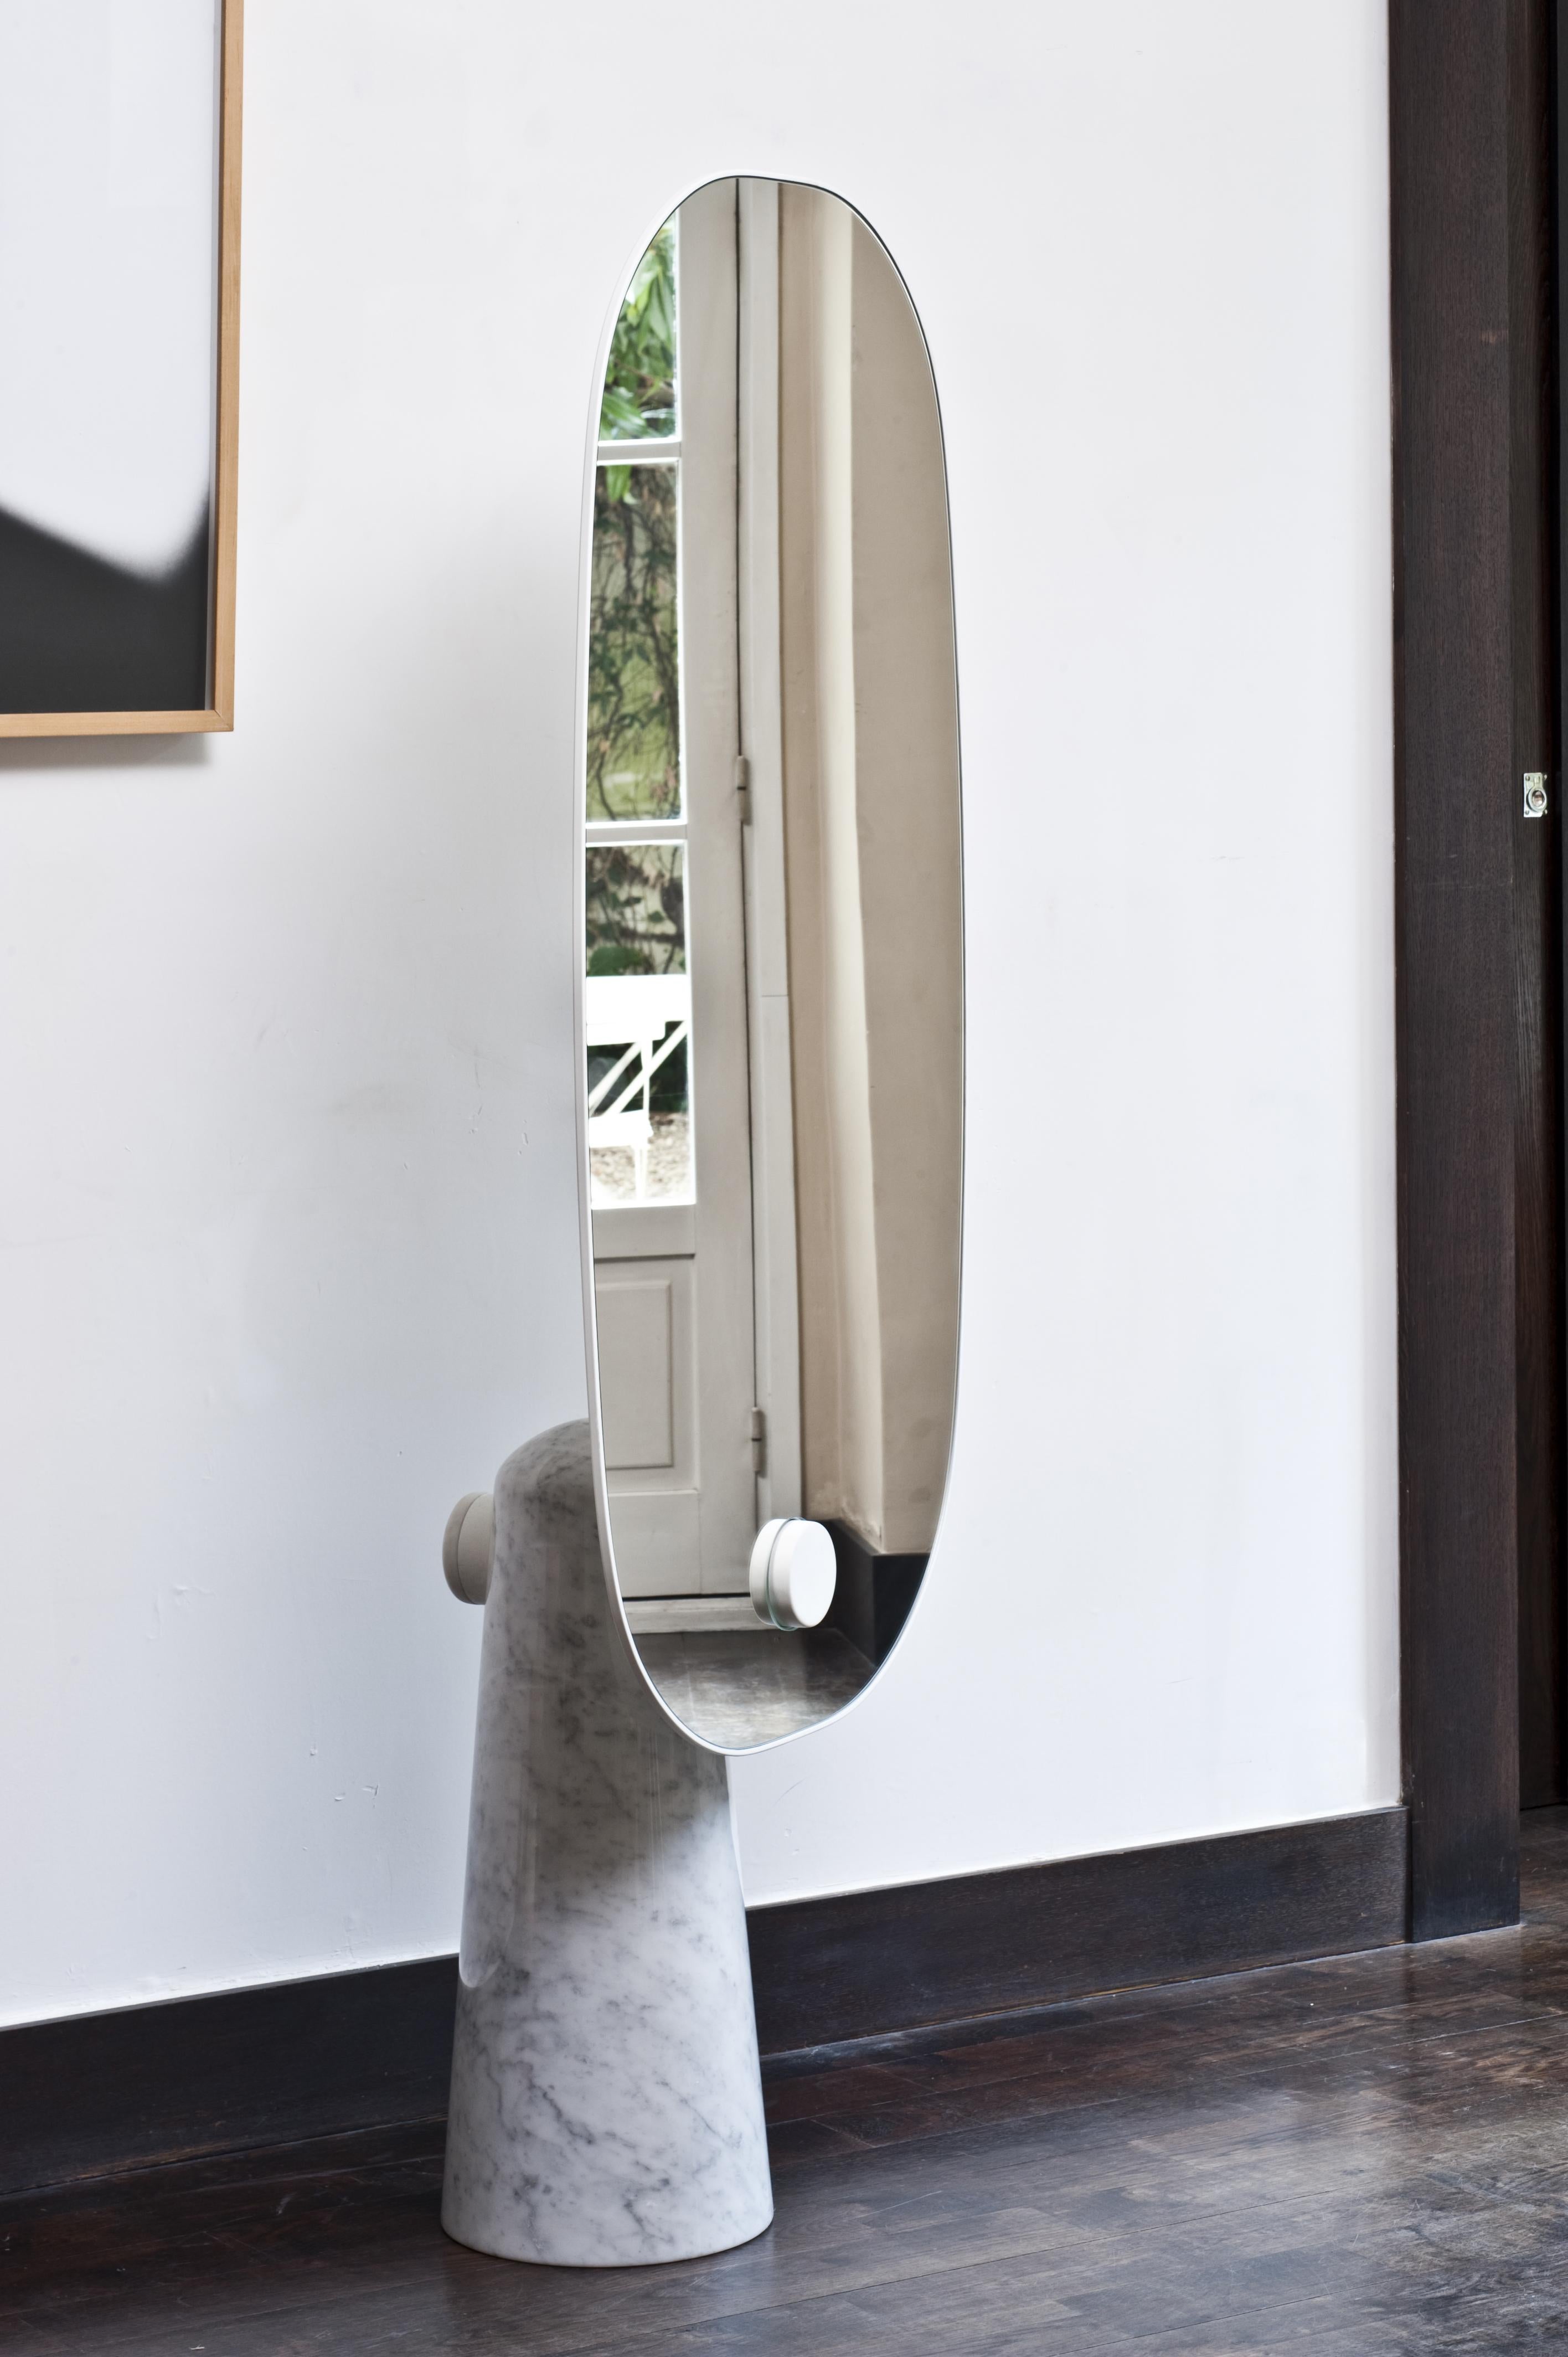 Iconic is a mirror that proudly stands as a statue. The white or black marble base pedestal supports a thin
metal structure.
The mirror seems to float above the base while an horizontal metal cylinder intersects both parts.
This oversized, free